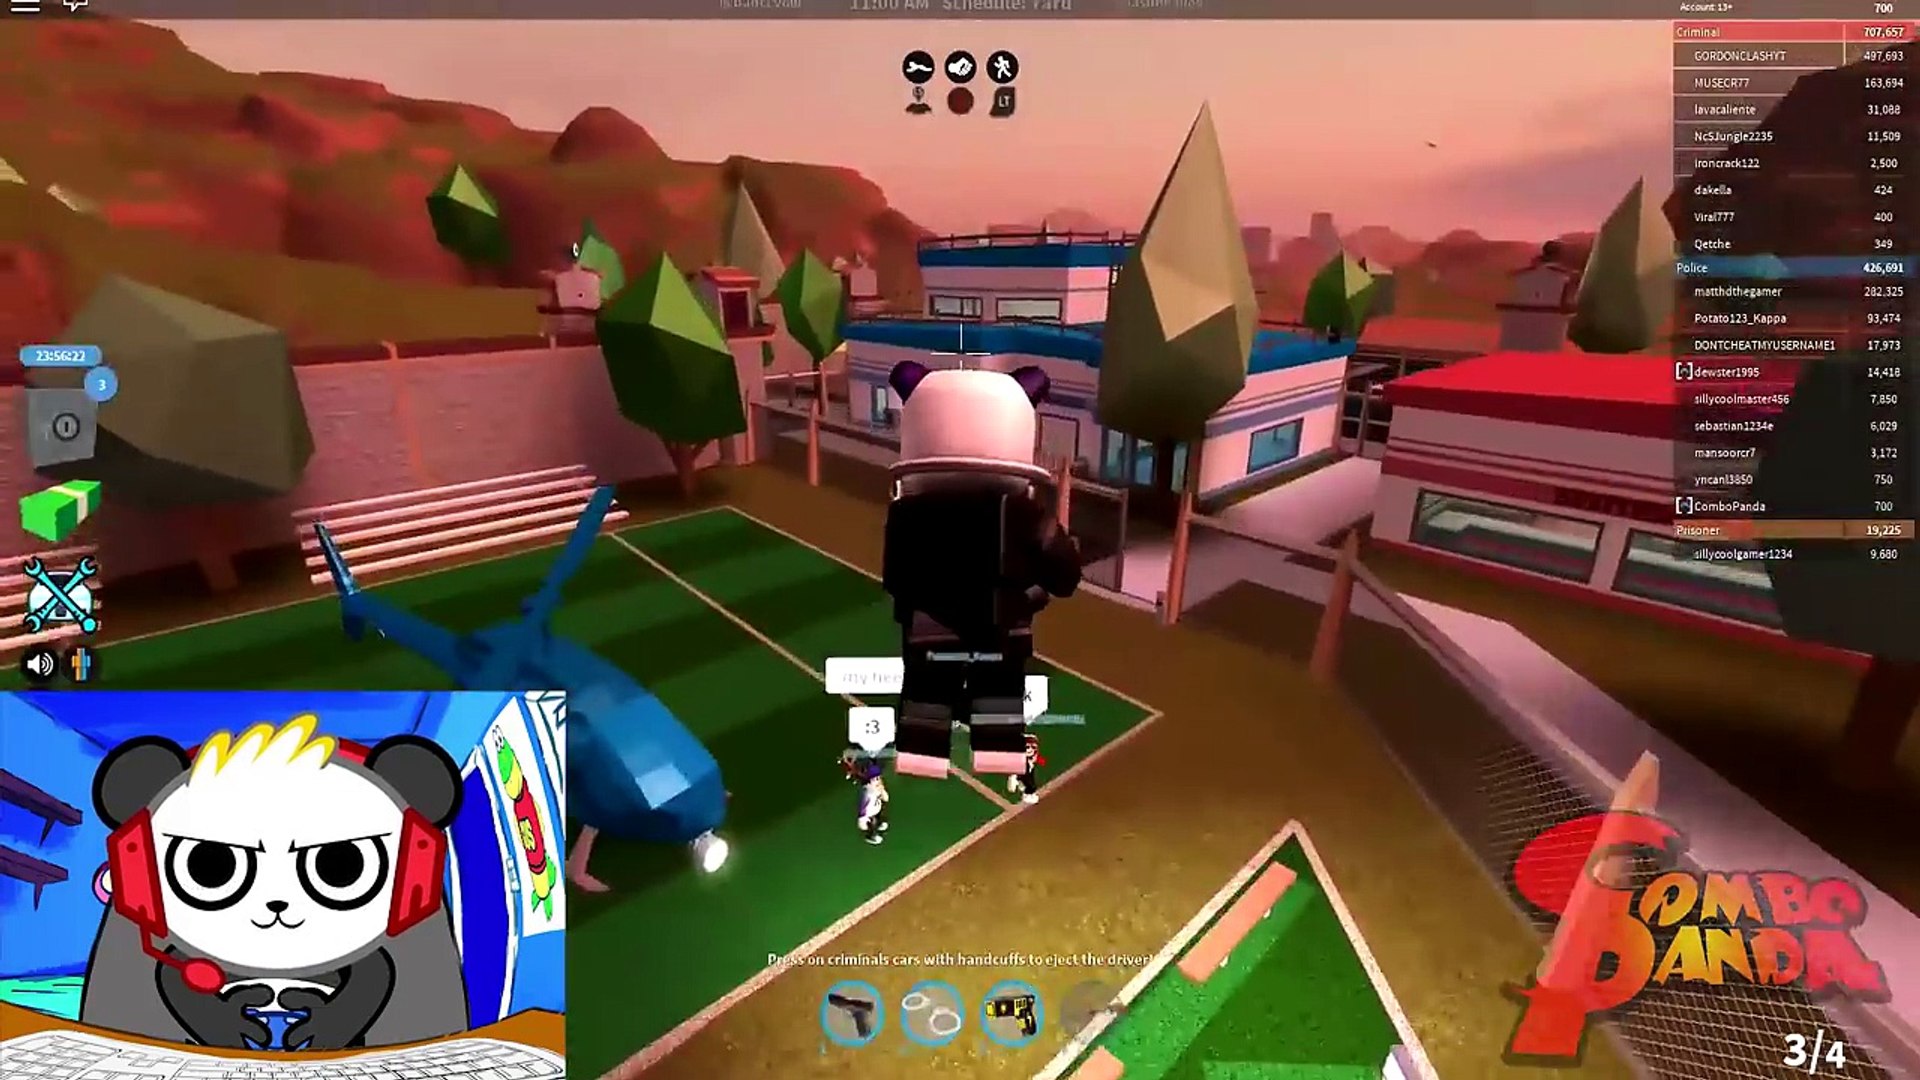 PLAYING JAILBREAK ON THE XBOX! (Roblox) - Dailymotion Video